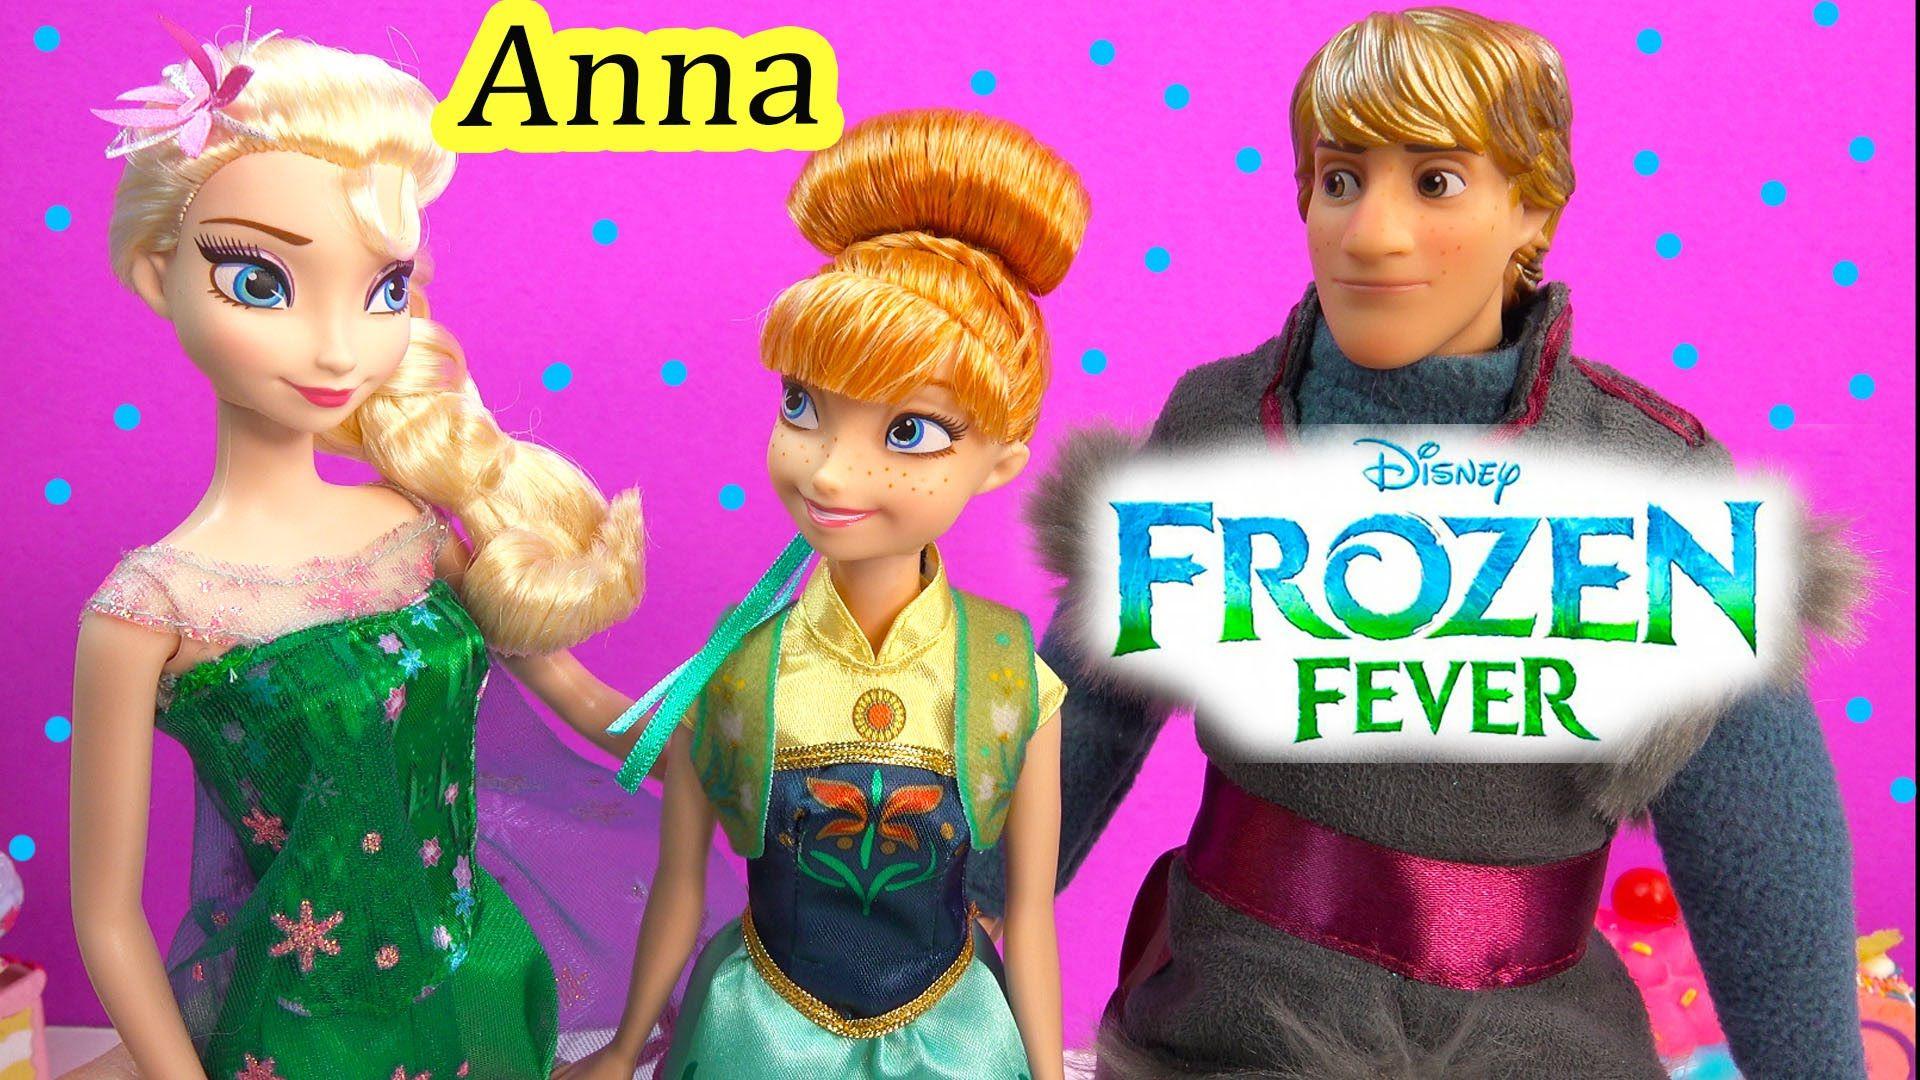 FROZEN FEVER Princess Anna Queen Elsa Birthday Party Doll From New